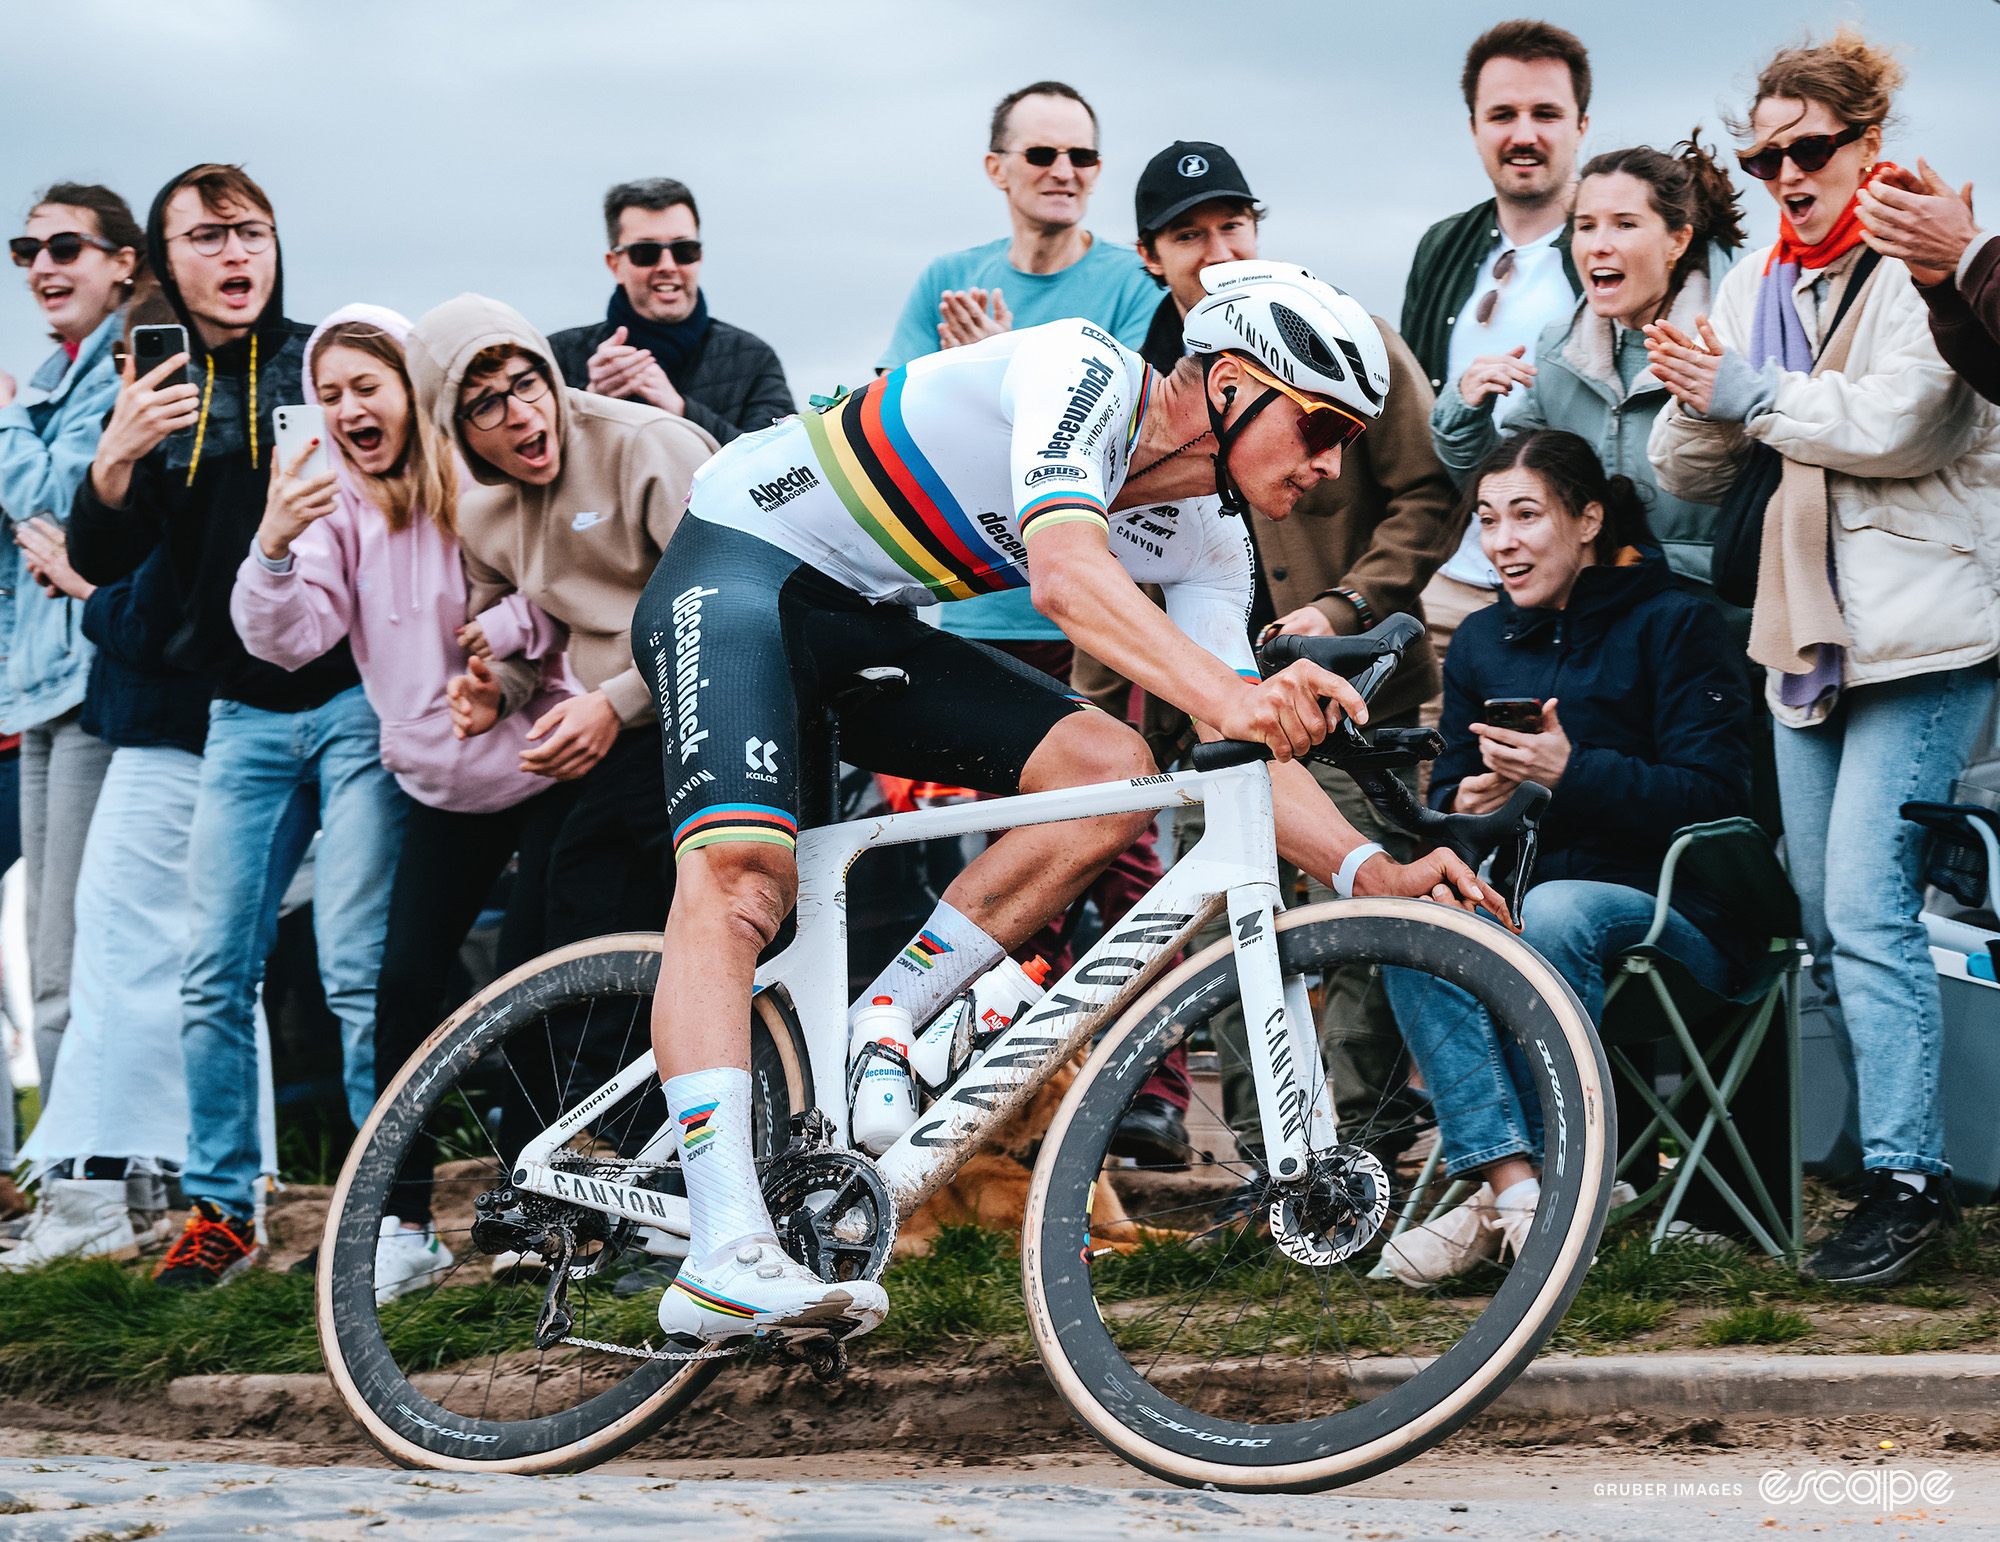 Well behaved (as far as we know) fans cheer on Mathieu van der Poel from the side of the road on Sunday at Paris-Roubaix.